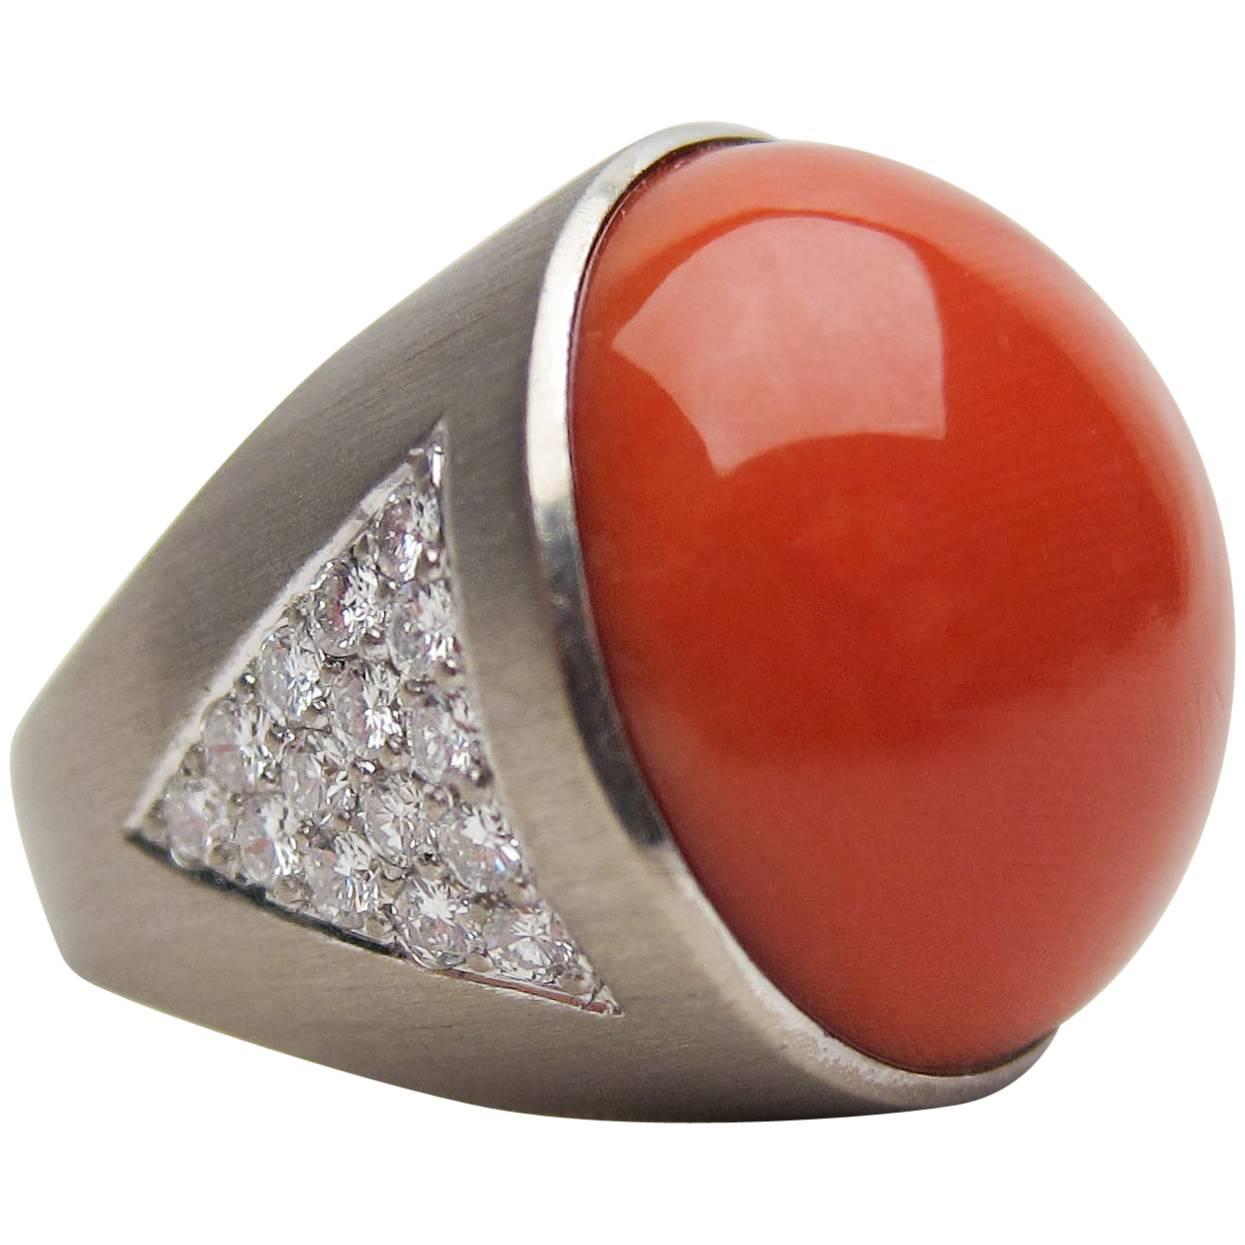 Late Midcentury 39.80 Carat Orange Coral Cabochon and Diamond Cocktail Ring For Sale